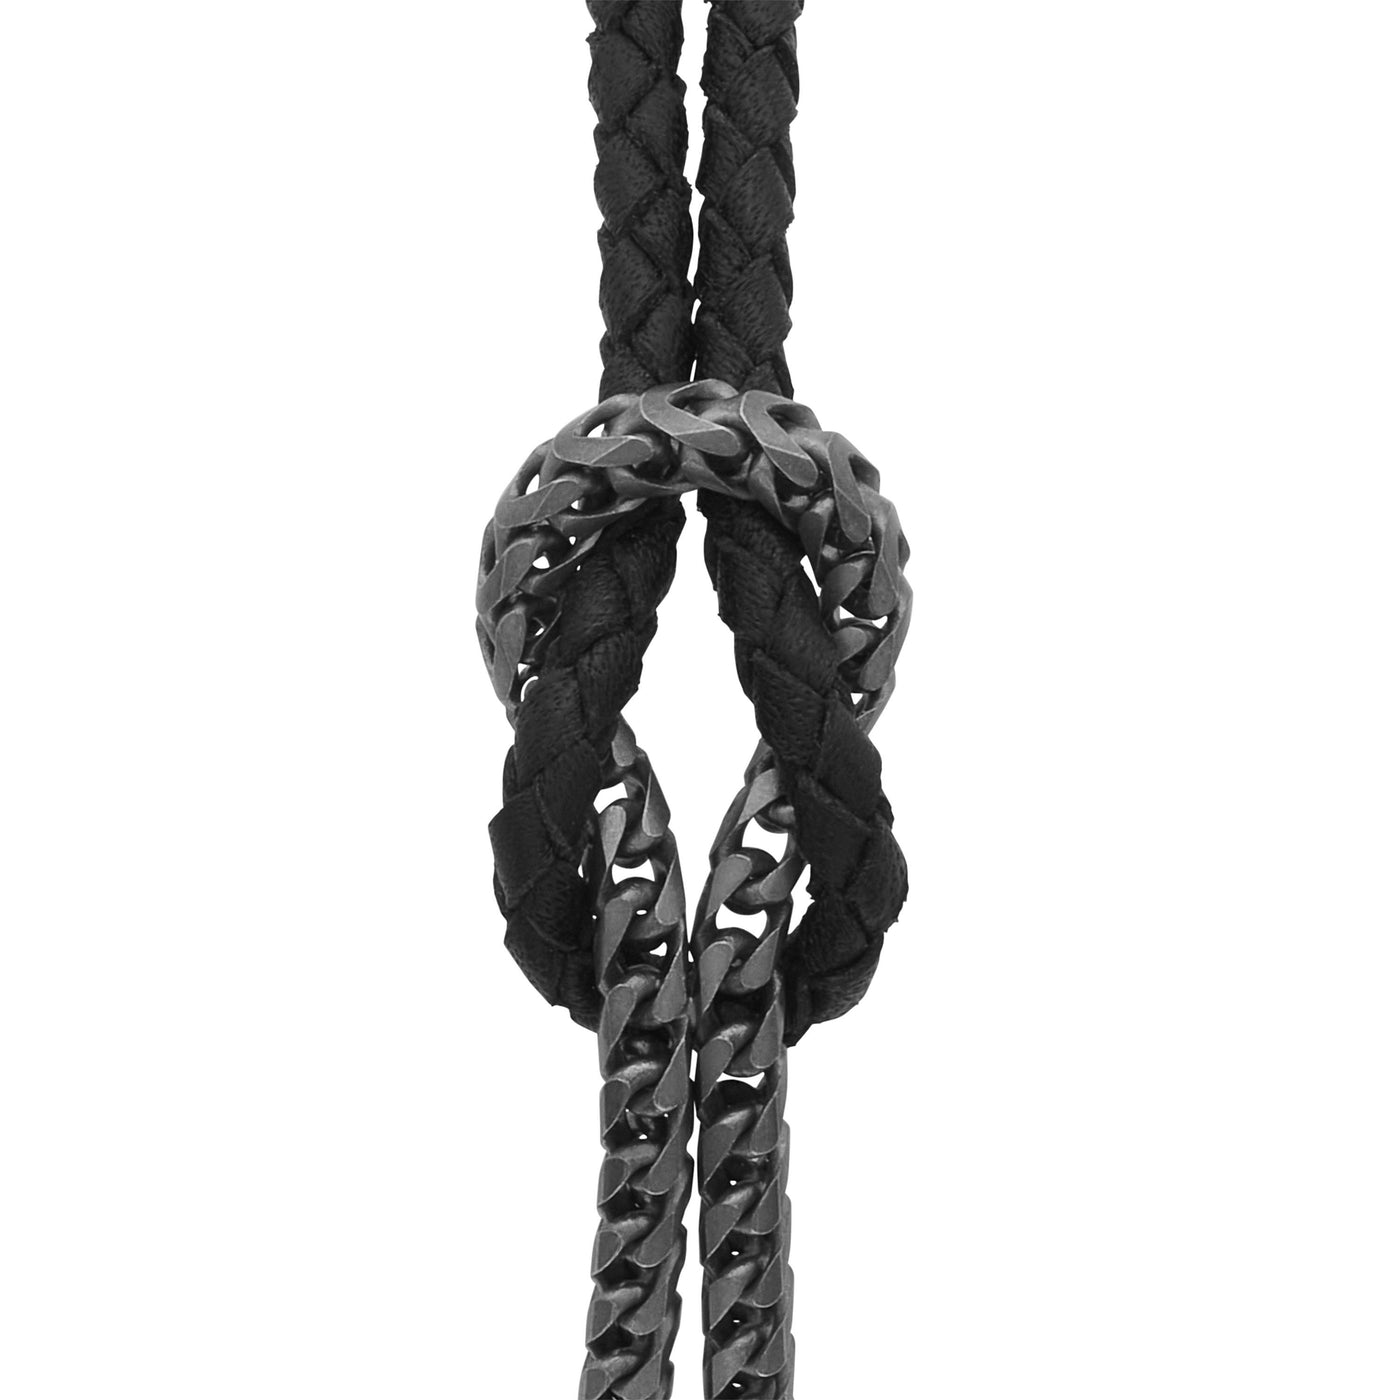 LASH Mix Reef Knot Chain Oxidized Bracelet and black leather